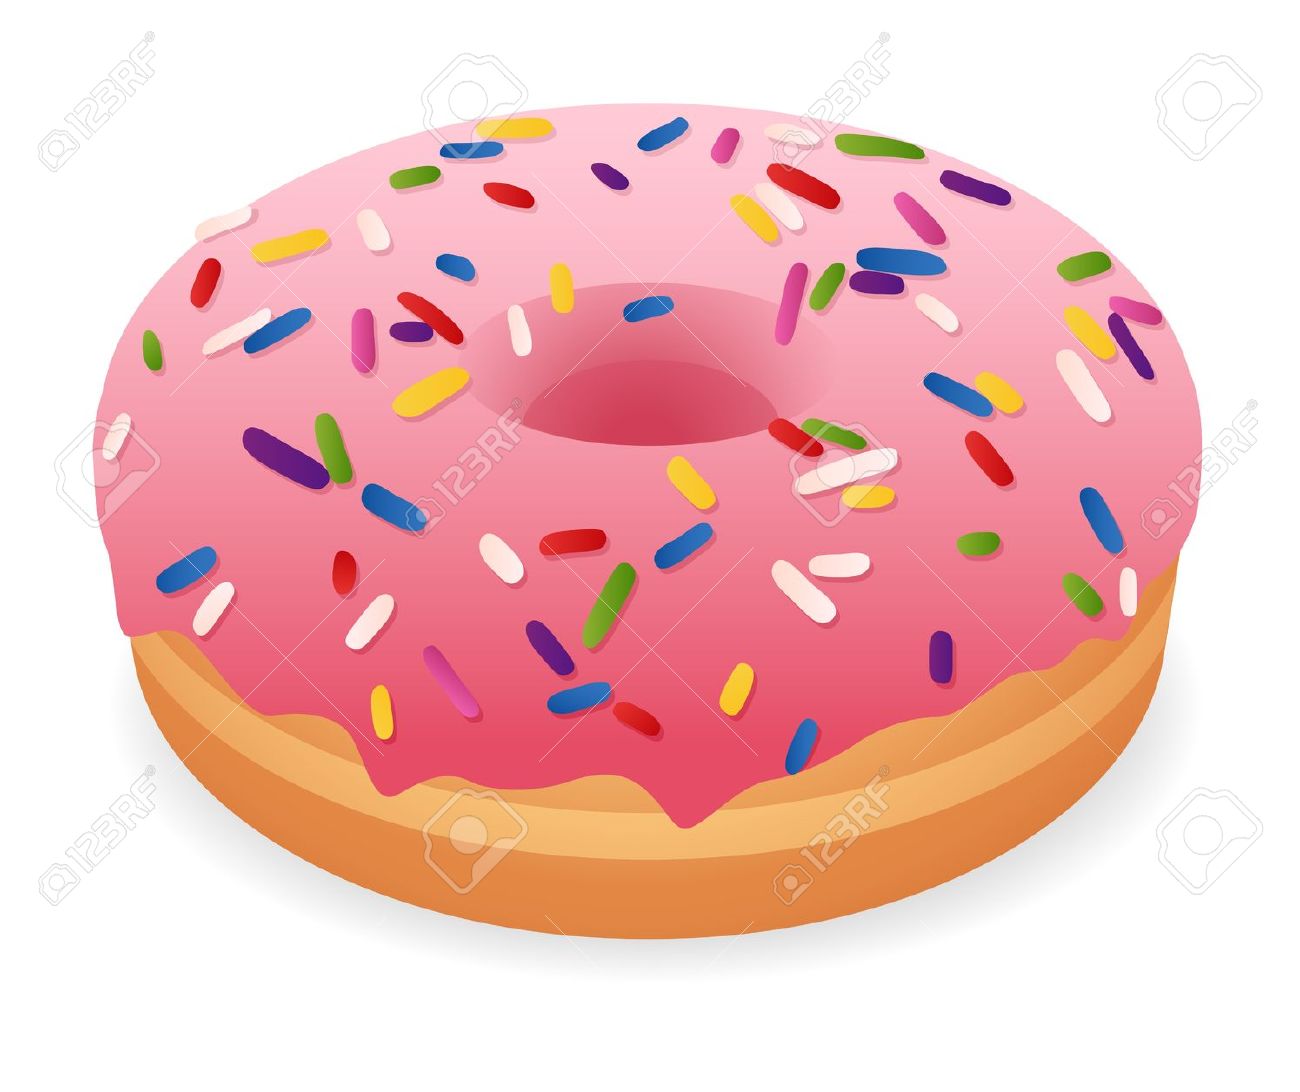 Free donut clipart images.